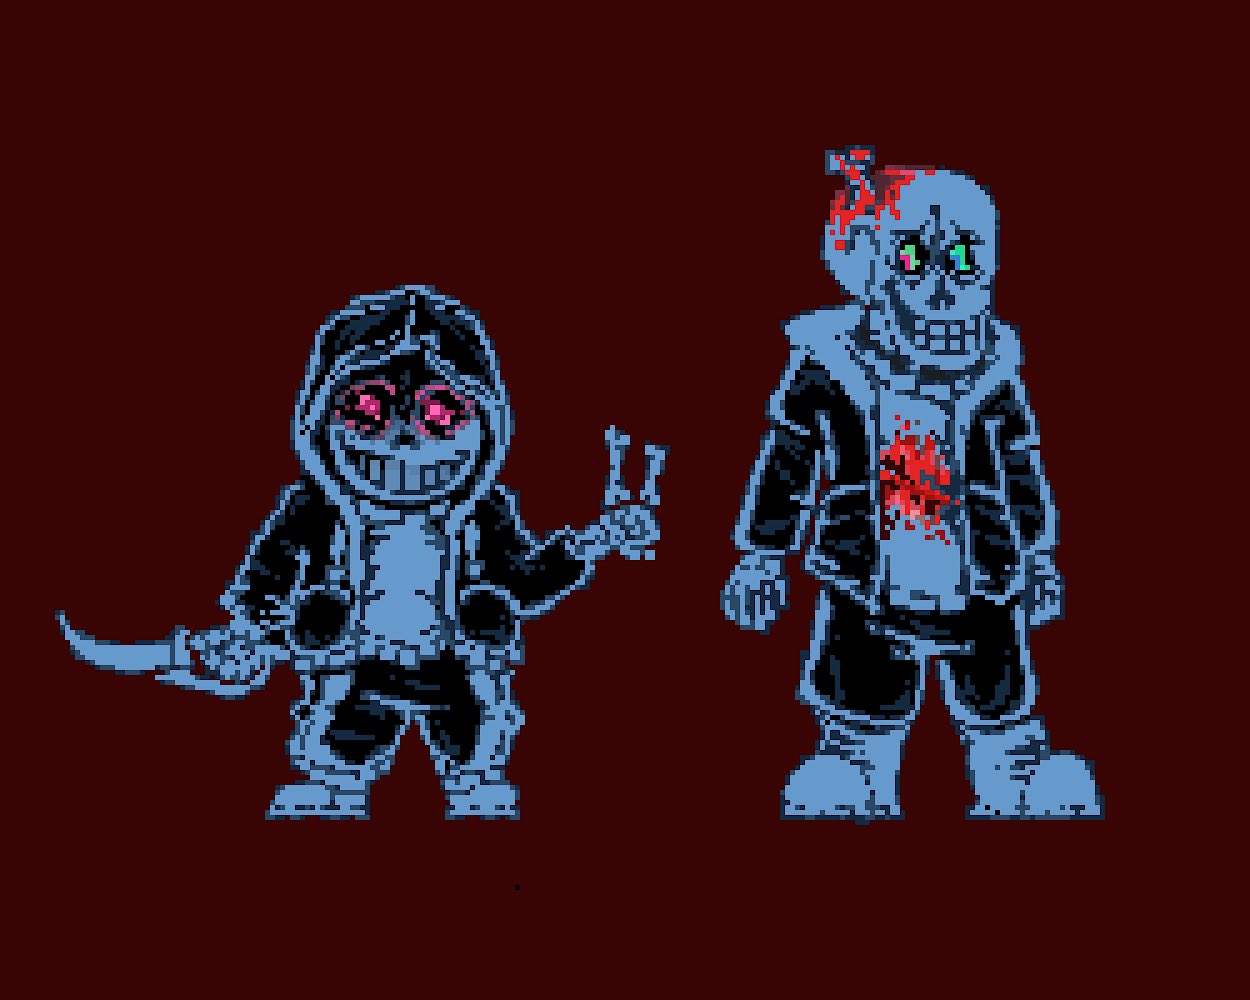 Anyone else think sans' talksprite is kind of ugly compared to his